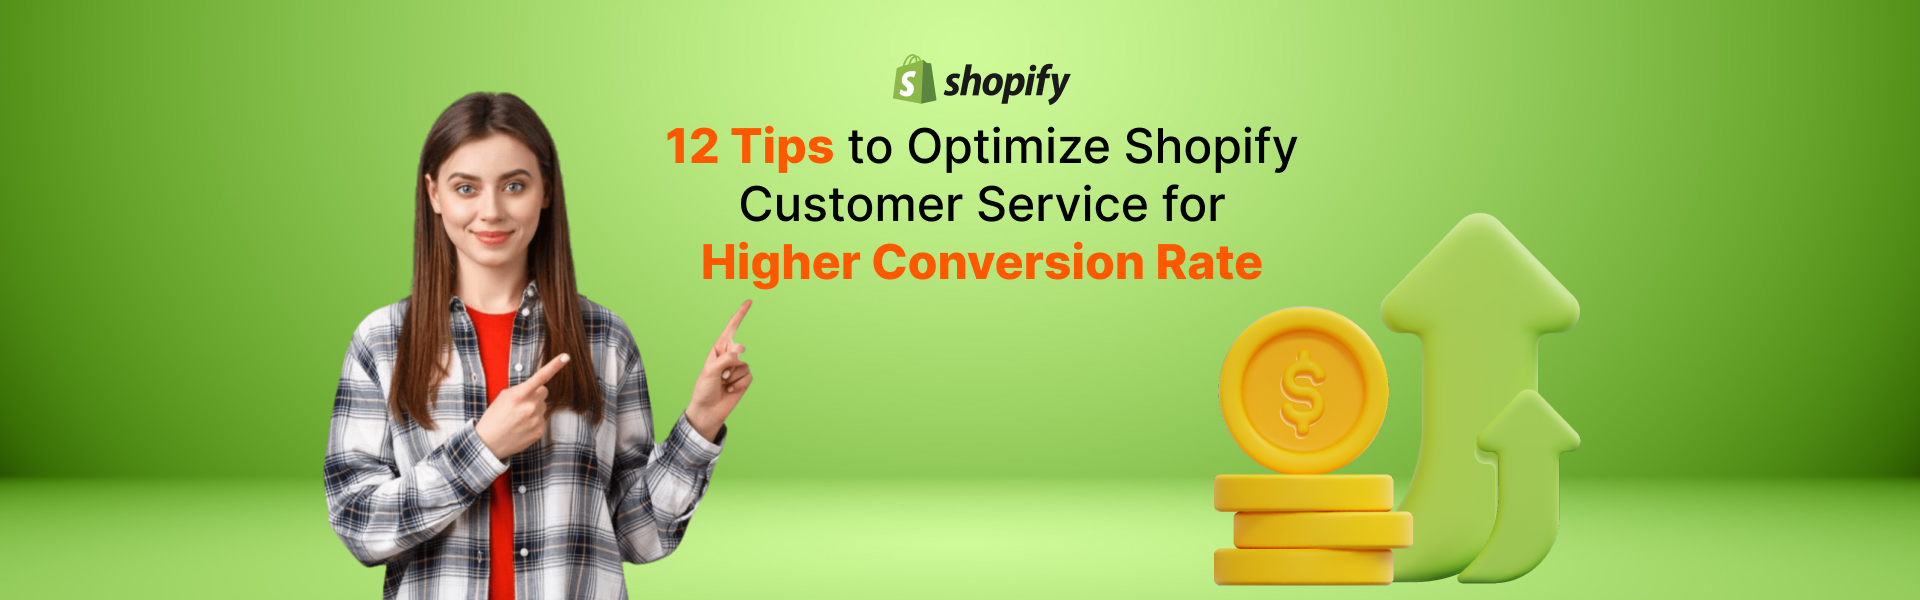 12 Tips to Optimize Shopify Customer Service for Higher Conversion Rate